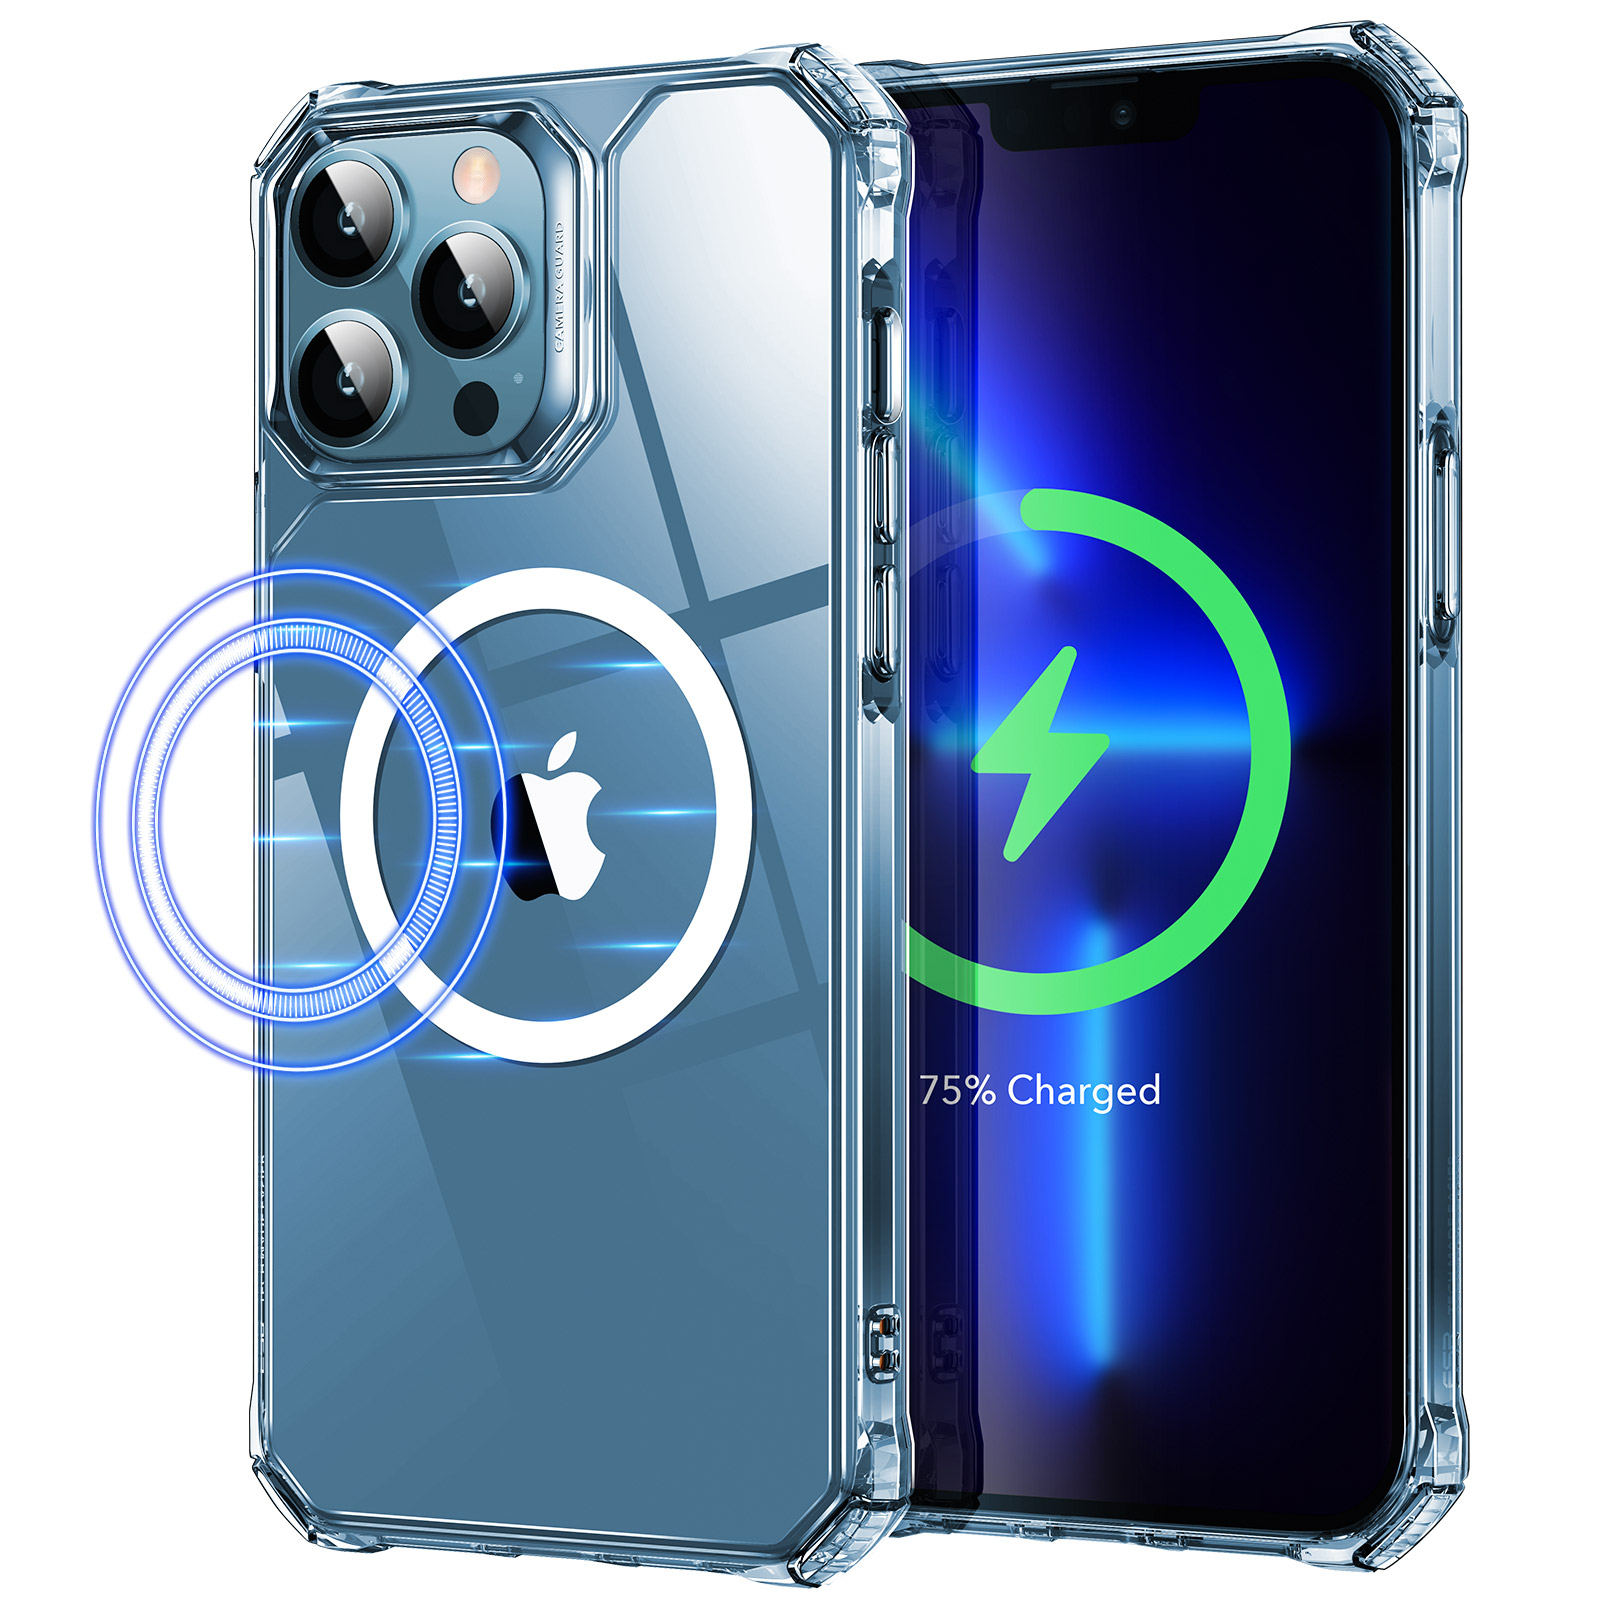 https://static.esrgear.com/wp-content/uploads/2021/08/iPhone-13-Pro-Max-Clear-Case-with-HaloLock.jpg